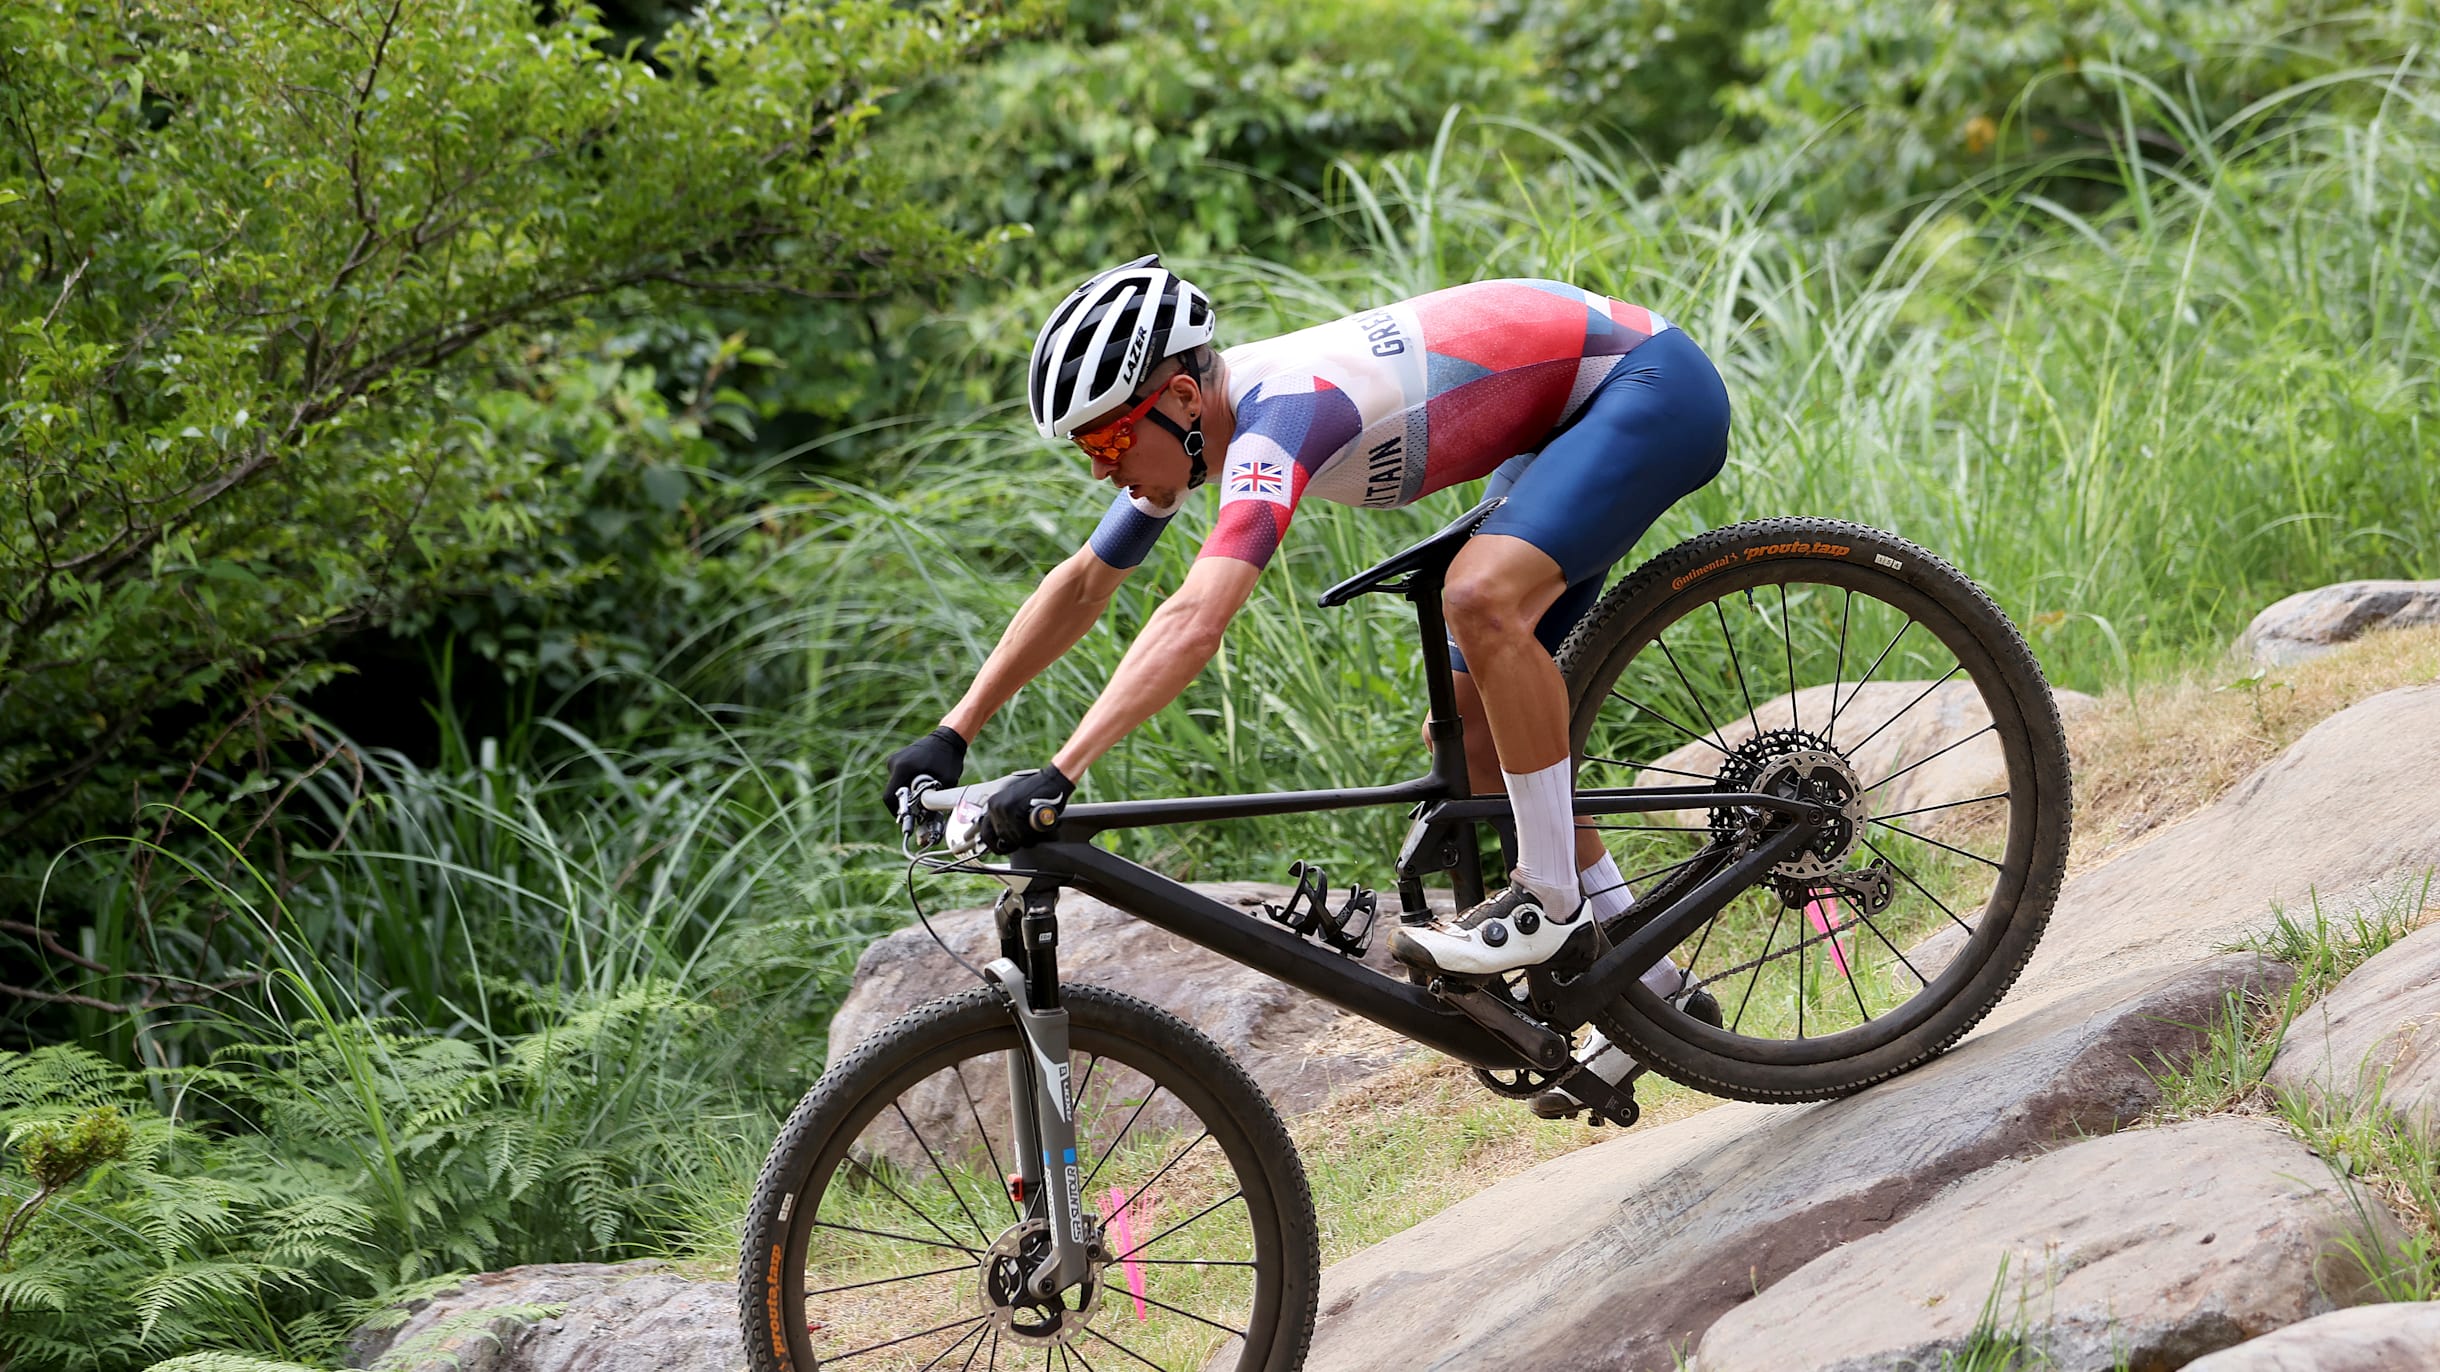 2023 UCI Mountain Bike World Championships Preview, schedule, how to watch watch live Paris 2024 Qualifying action